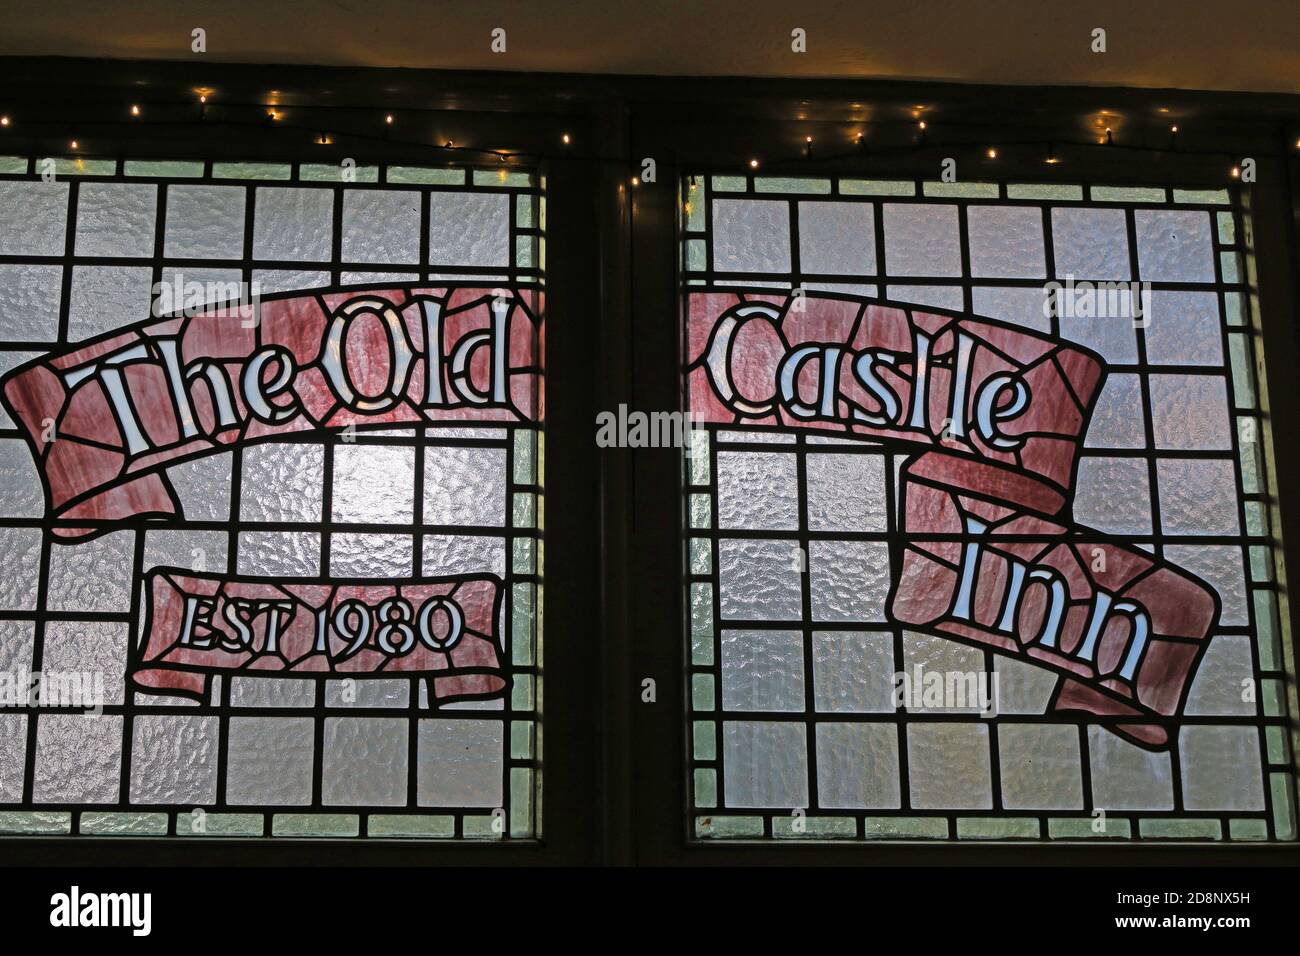 The Old Castle Inn, Traditional Ales, Stained Glass,1980,in a bar/pub,Nottingham,city centre,Nottinghamshire, England,UK Stock Photo